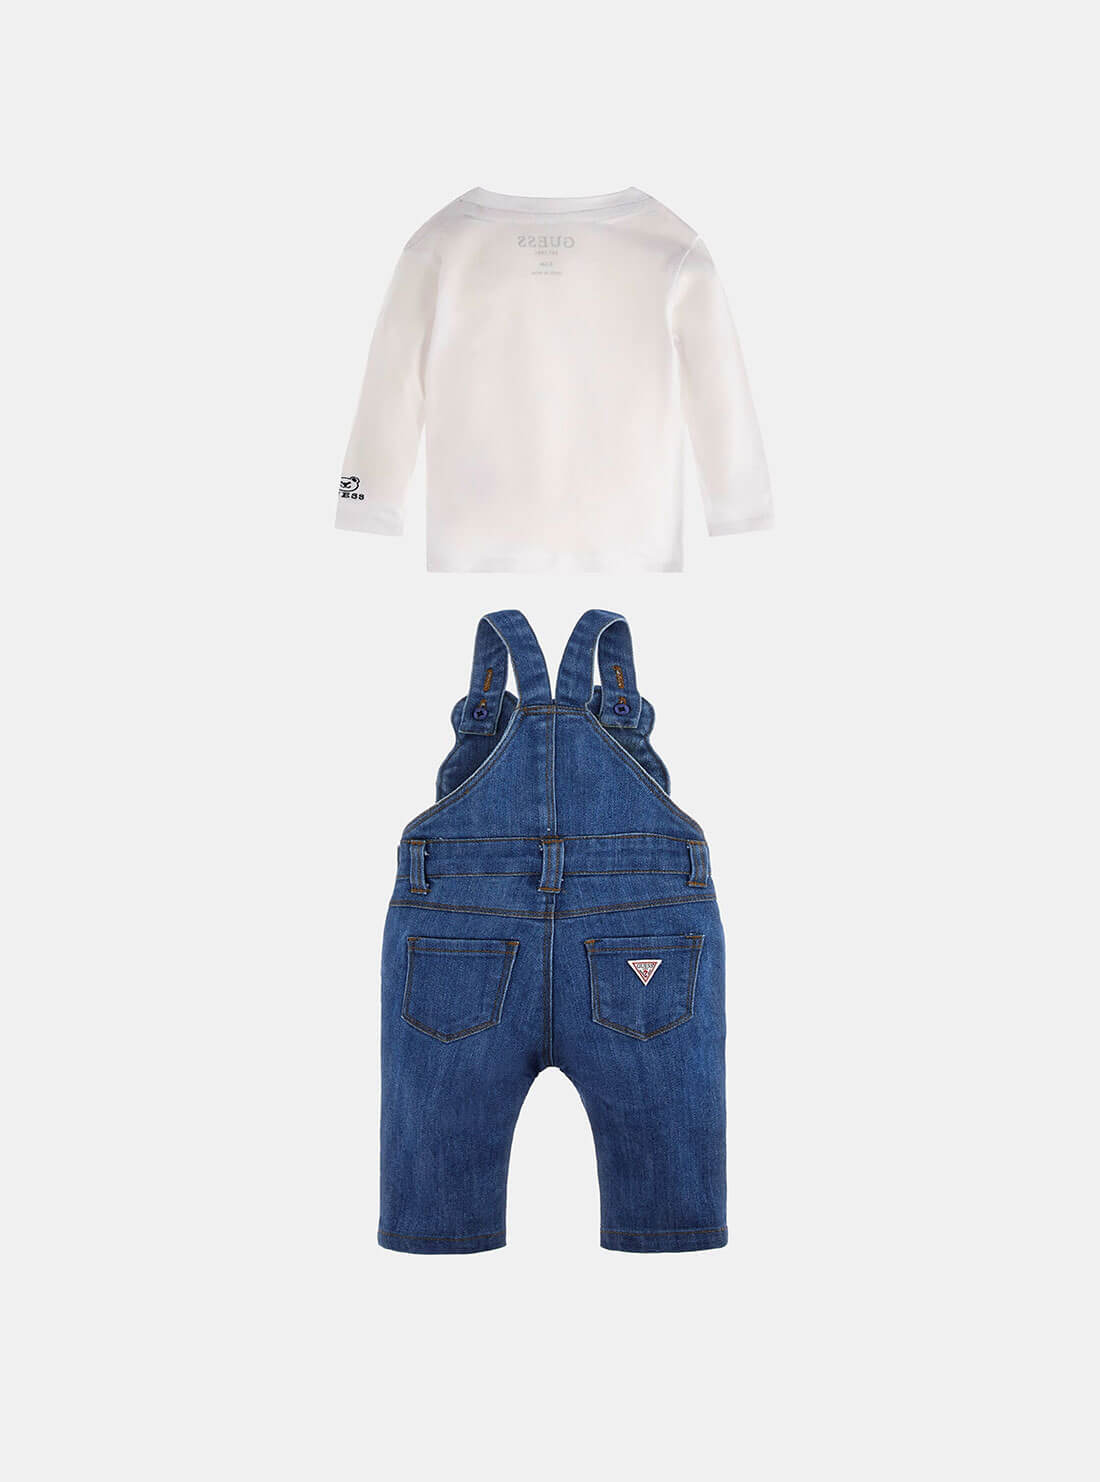 White Long Sleeve Top and Blue Denim Bear Overalls Set (3-18M) | GUESS kids | back view